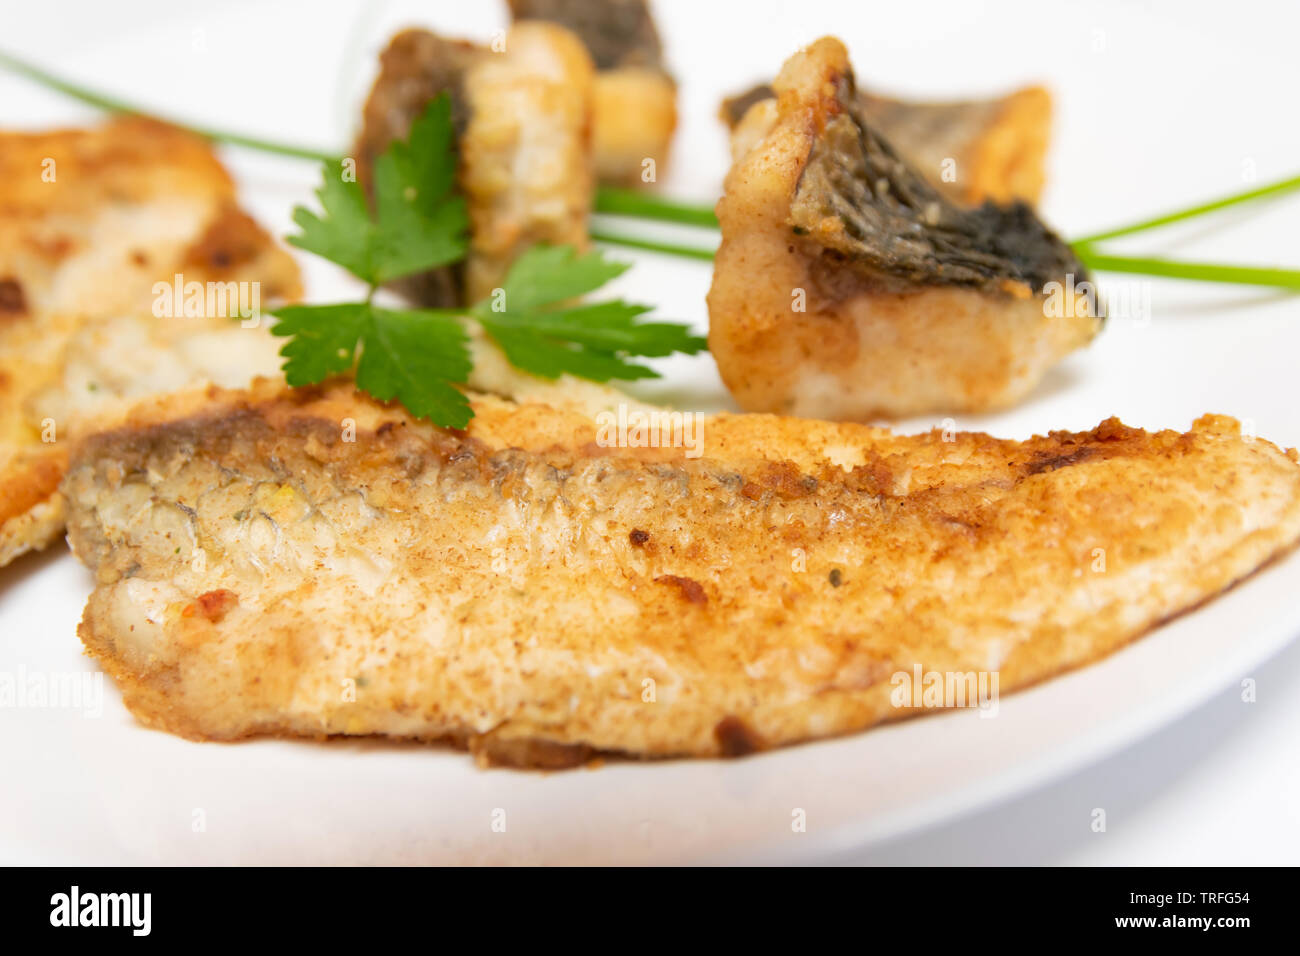 Tasty food, nutrition, kitchen and culinary concept: closeup pieces of fried, baked, golden and tasty fish on a white plate. Stock Photo